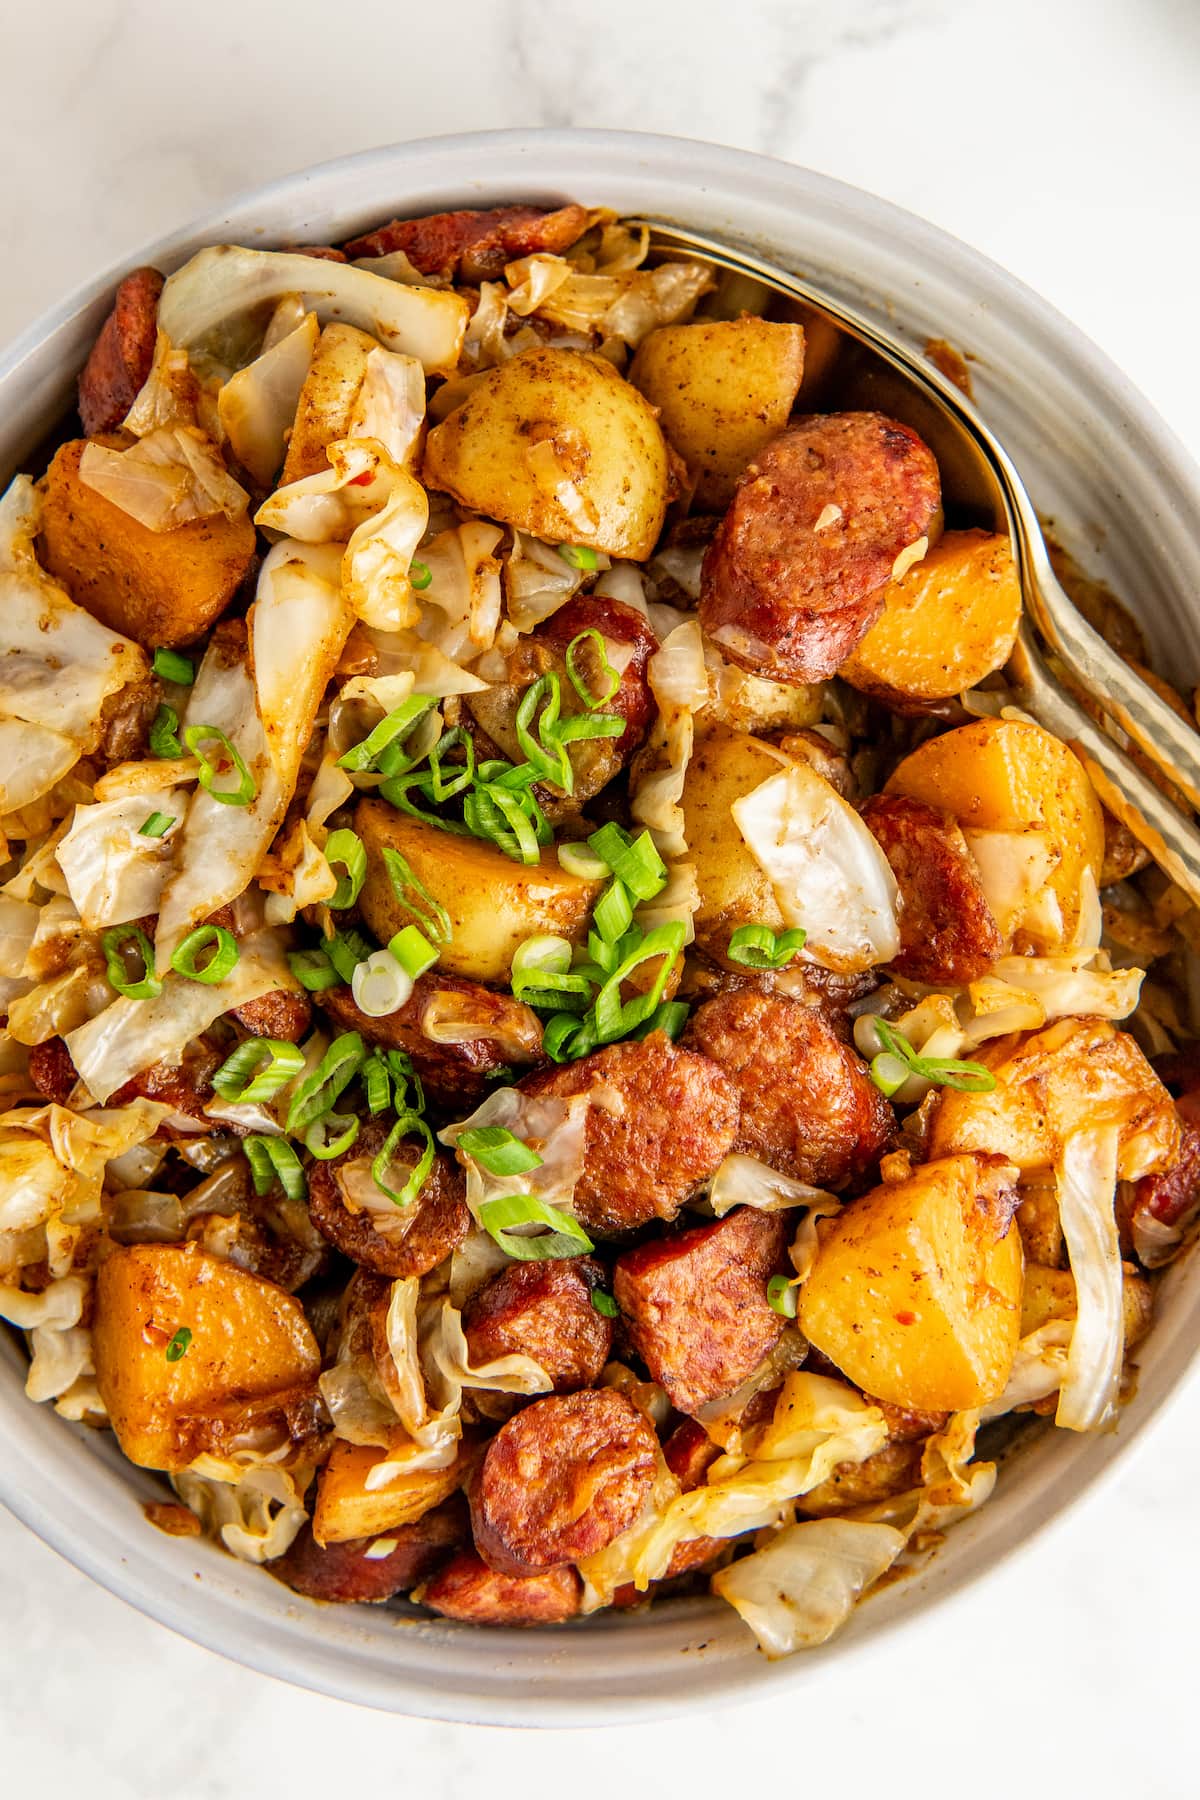 Serving a portion of cabbage, sausage, and potatoes with a large spoon.